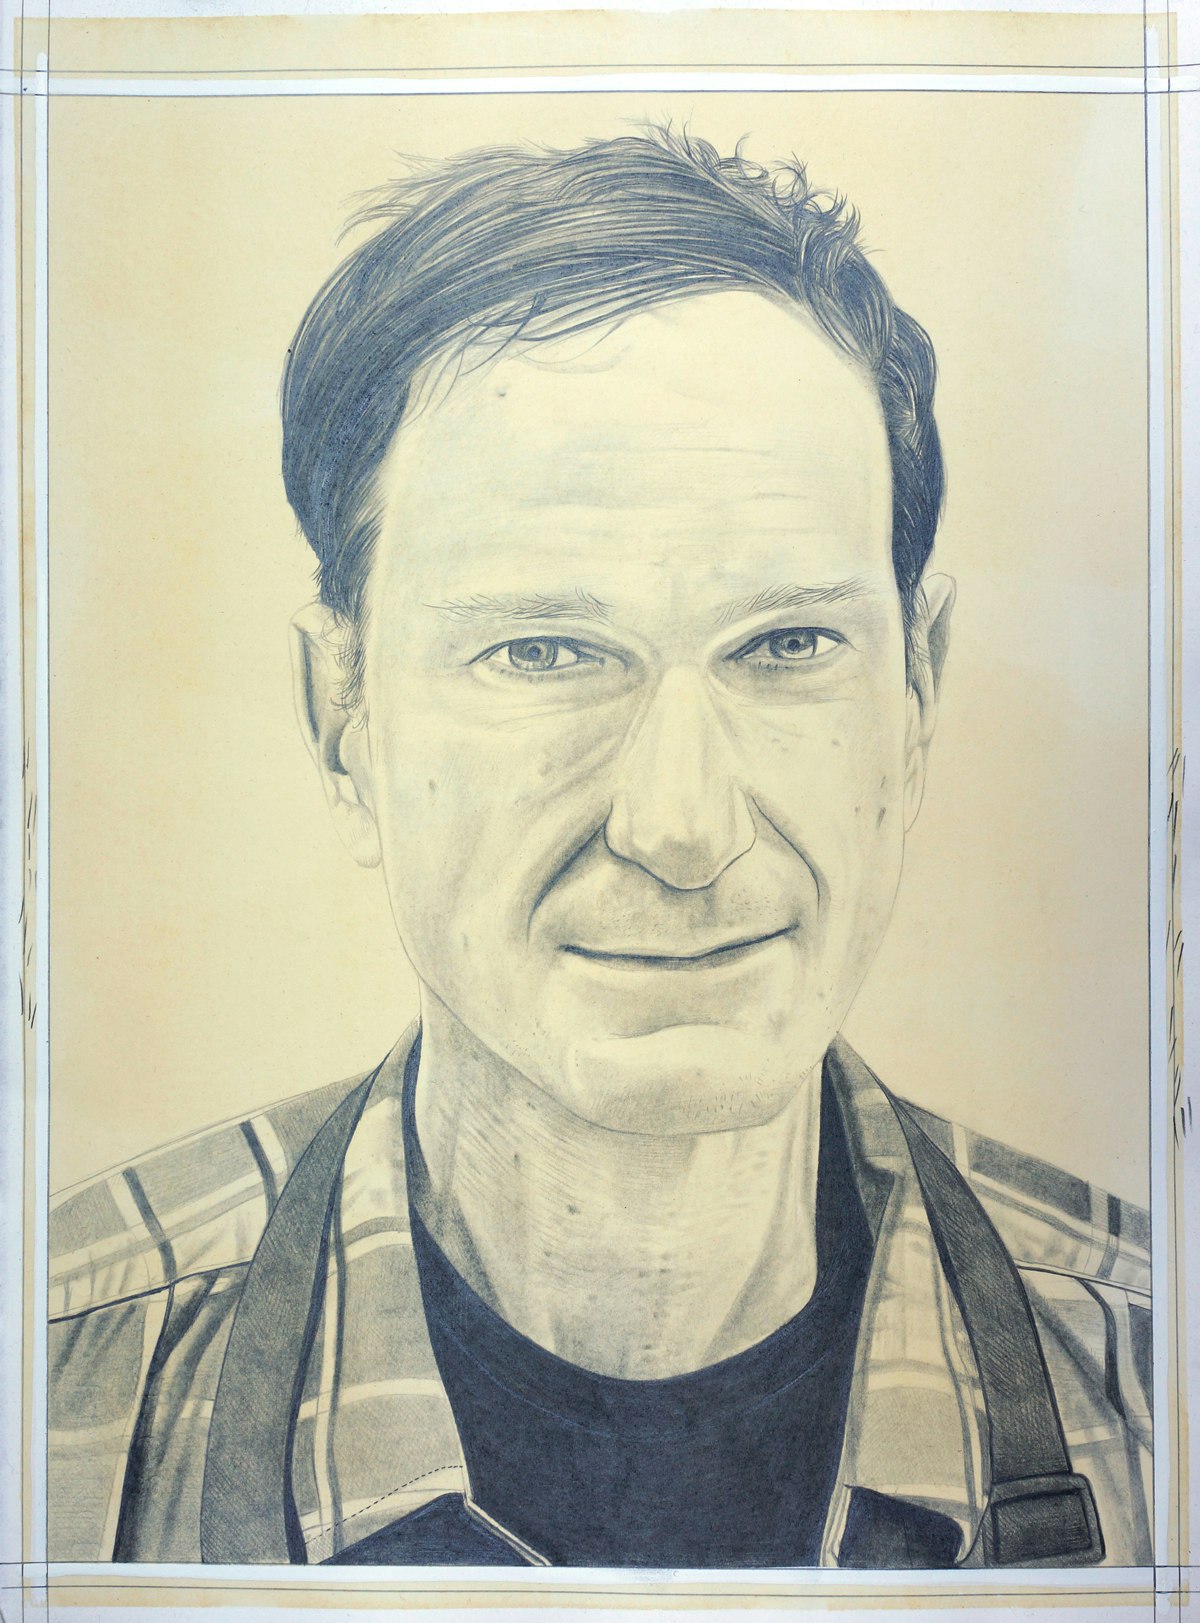 Portrait of Josh Smith, pencil on paper by Phong Bui.